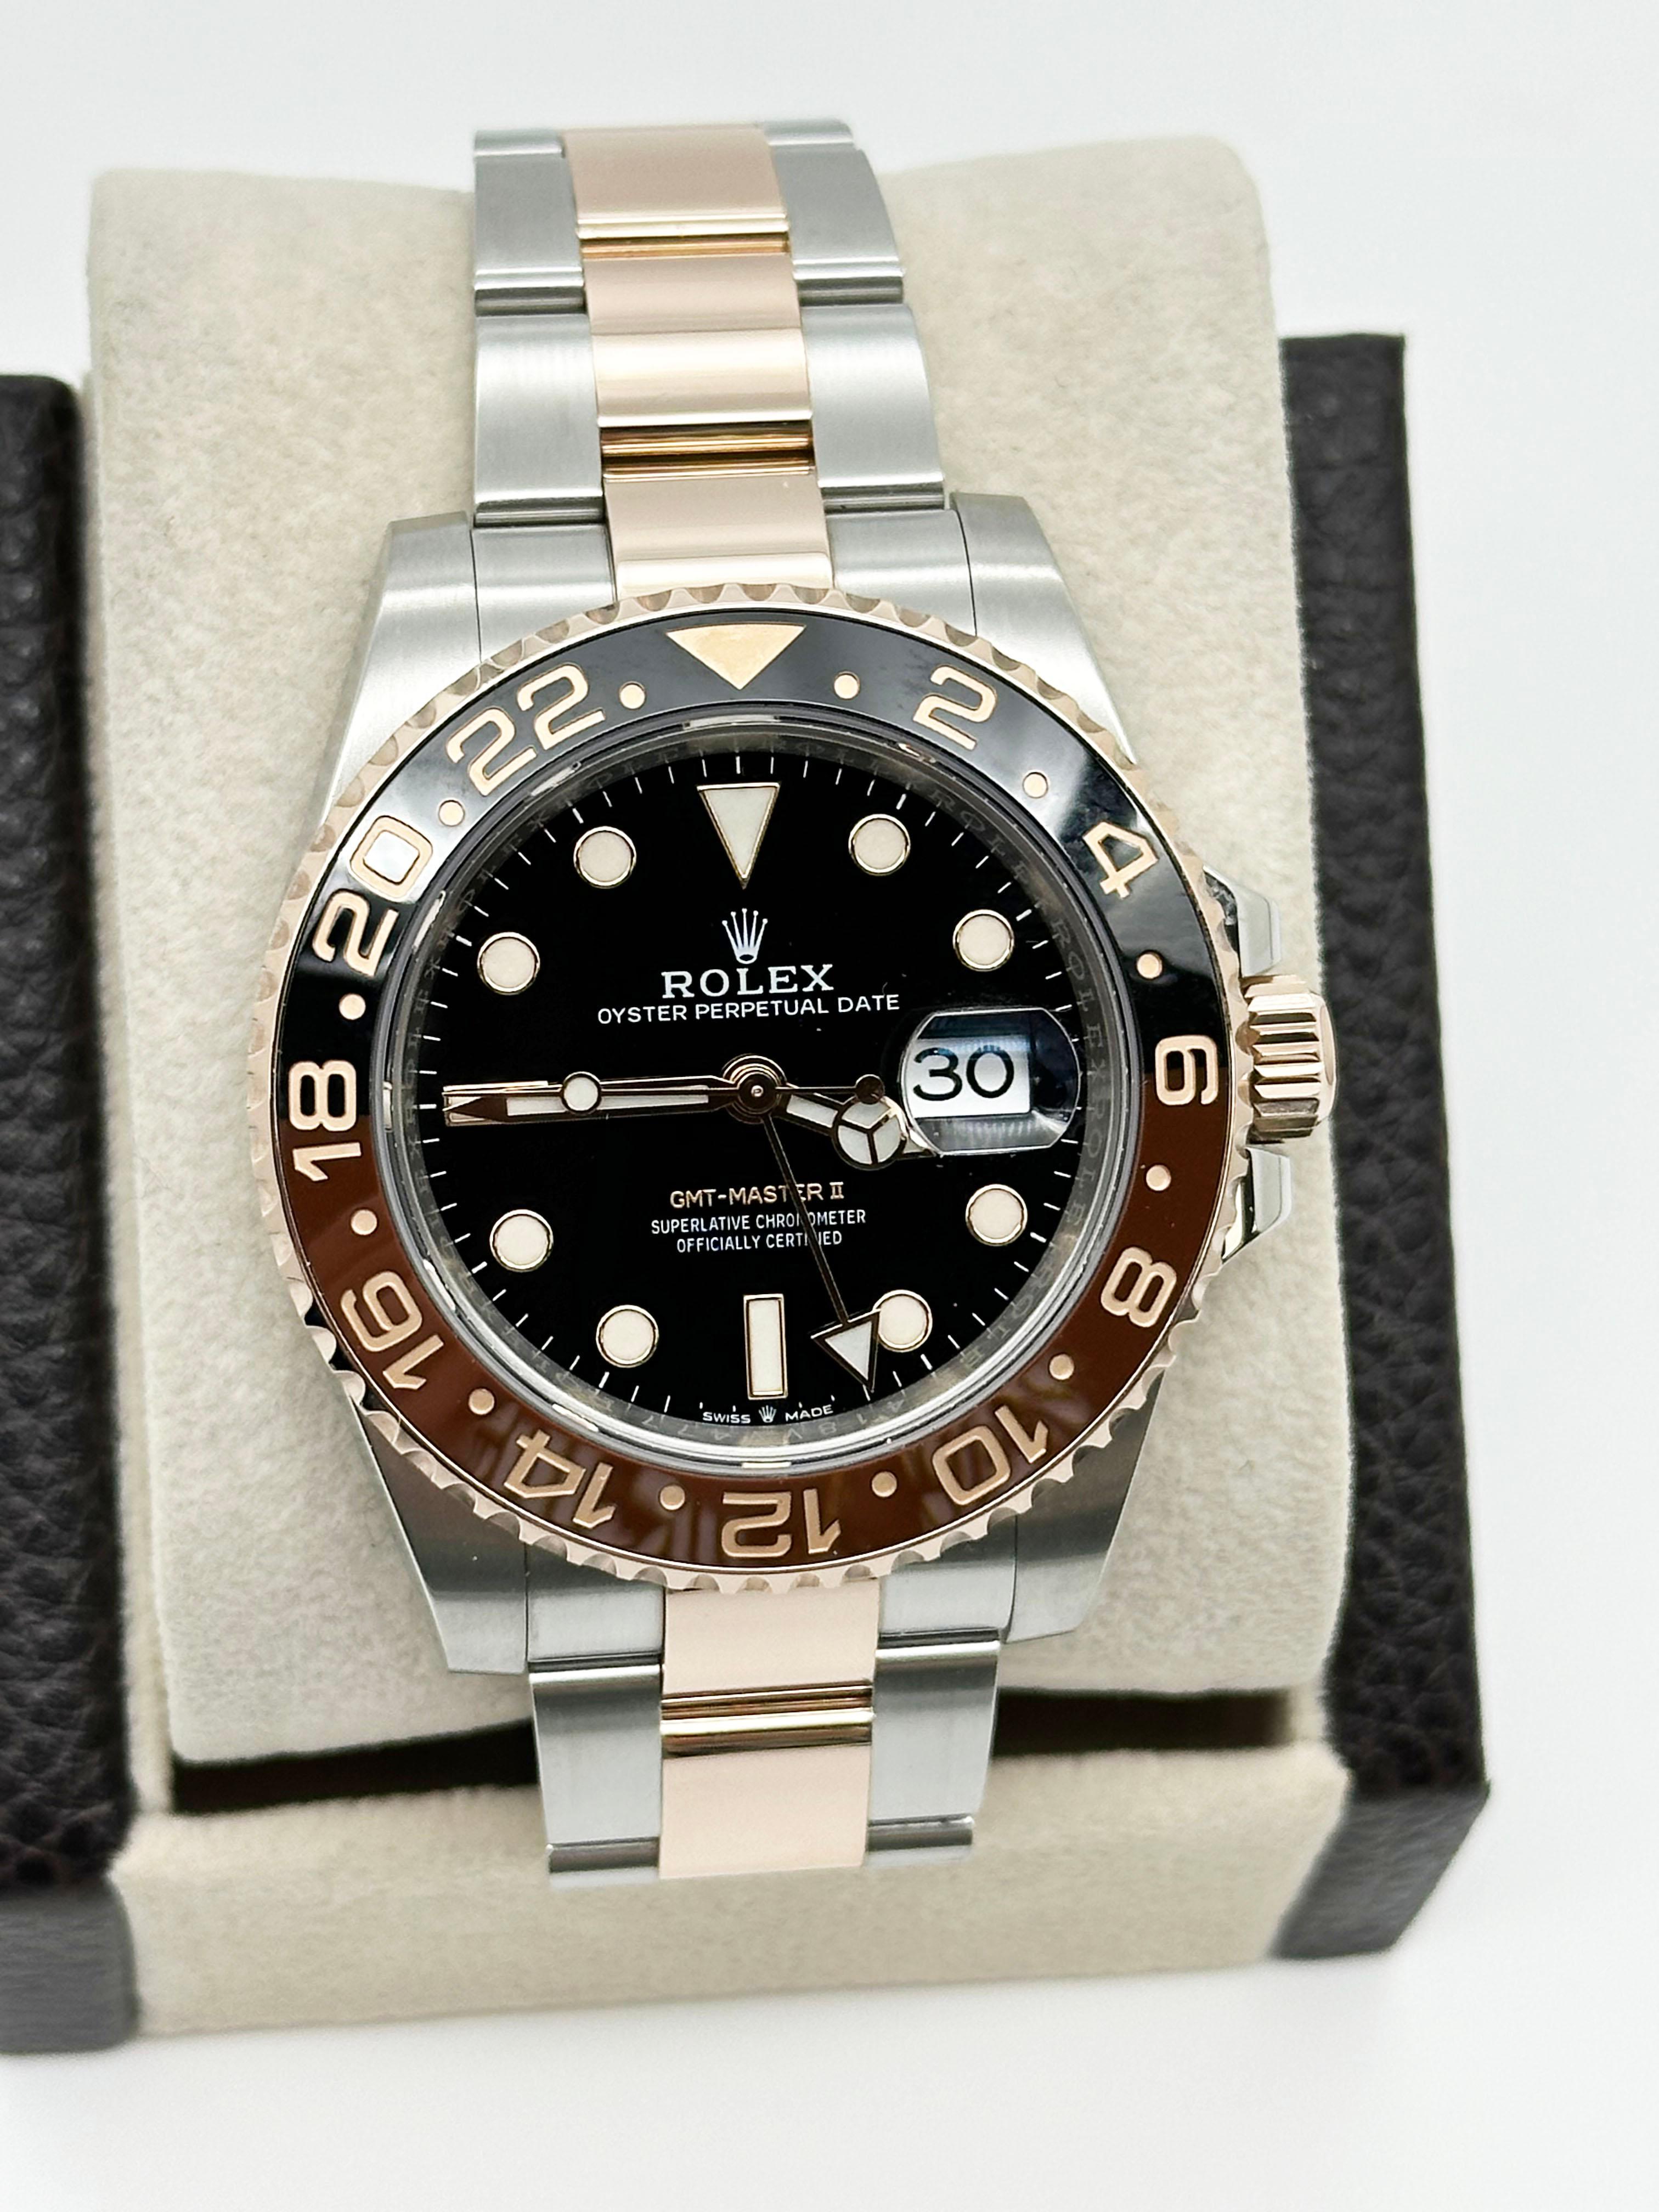 Is the Rolex “Root Beer” rare?